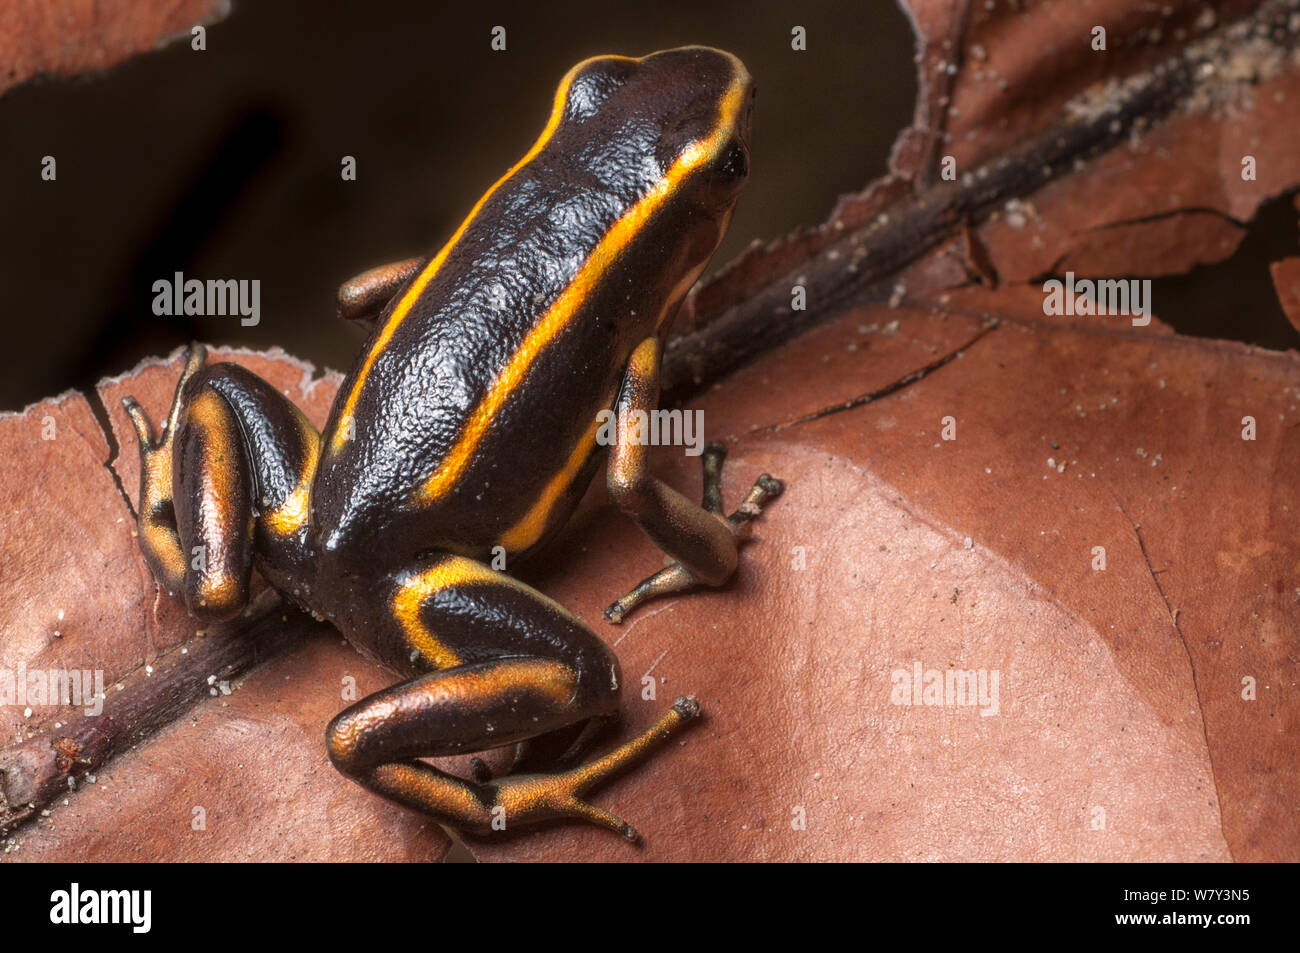 Yellow-striped Poison Dart Frog (Dendrobates truncatus) in leaf litter on forest floor, Paujil Nature Reserve, Magdalena Valley, Colombia, South America. Stock Photo